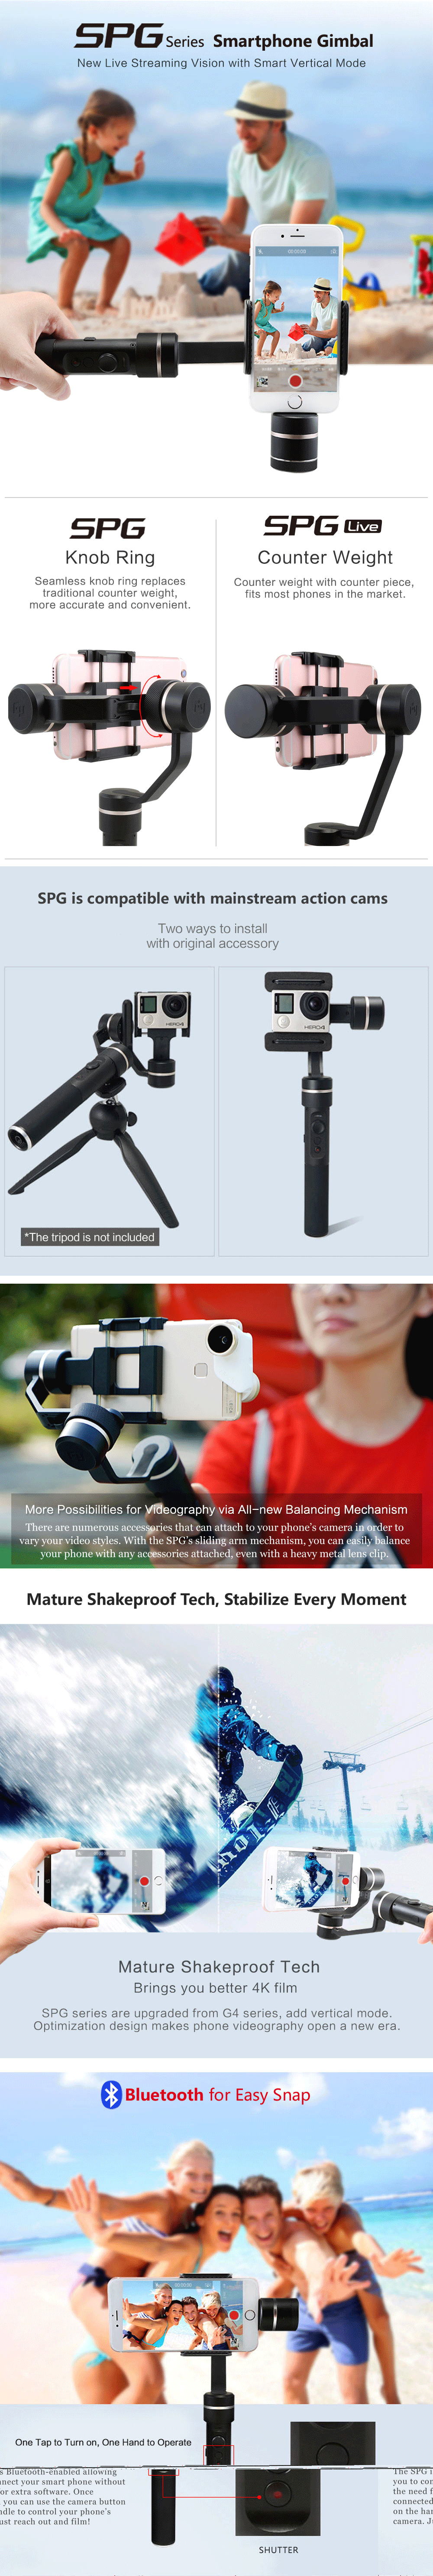 Feiyu Tech SPG Steaming Vision 3 Aixs Handheld Smartphone Gimbal with Smart Vertical Mode